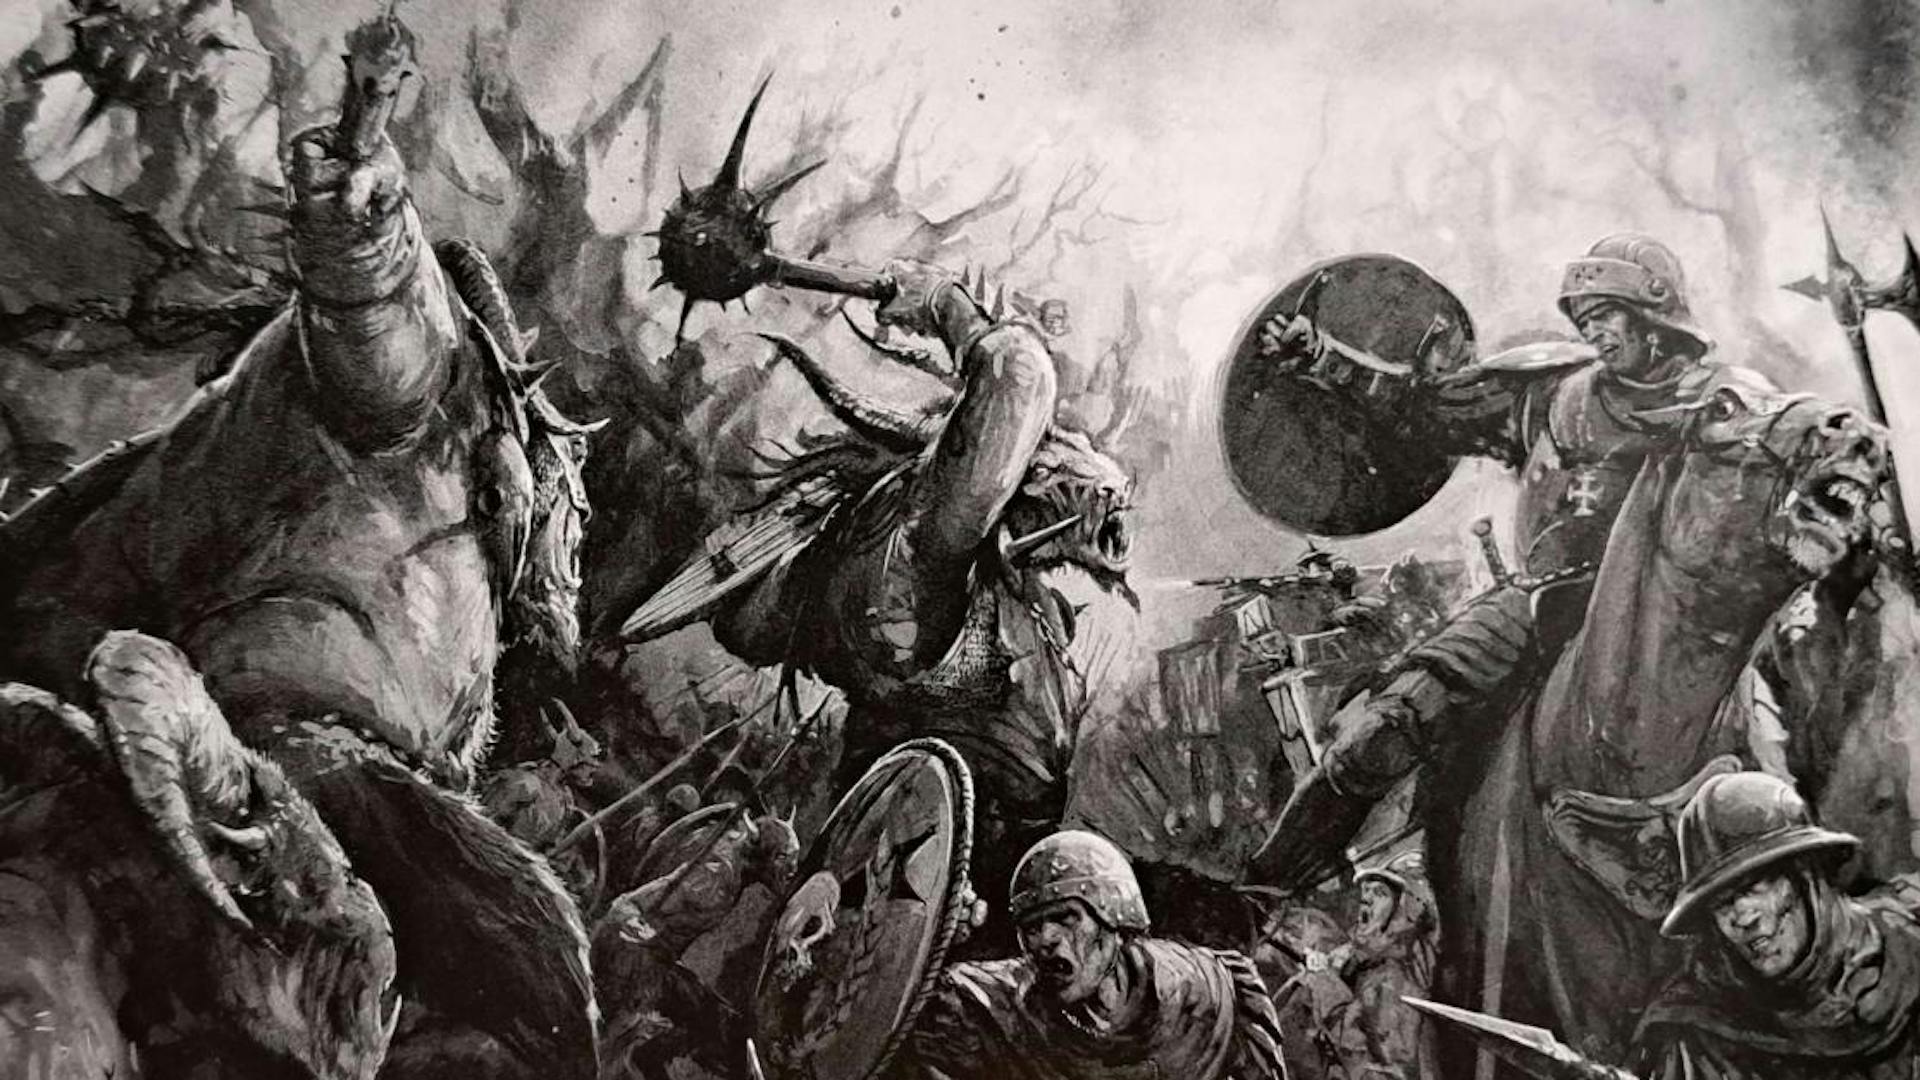 A black and white artwork from the Beastmen fantasy armies book.